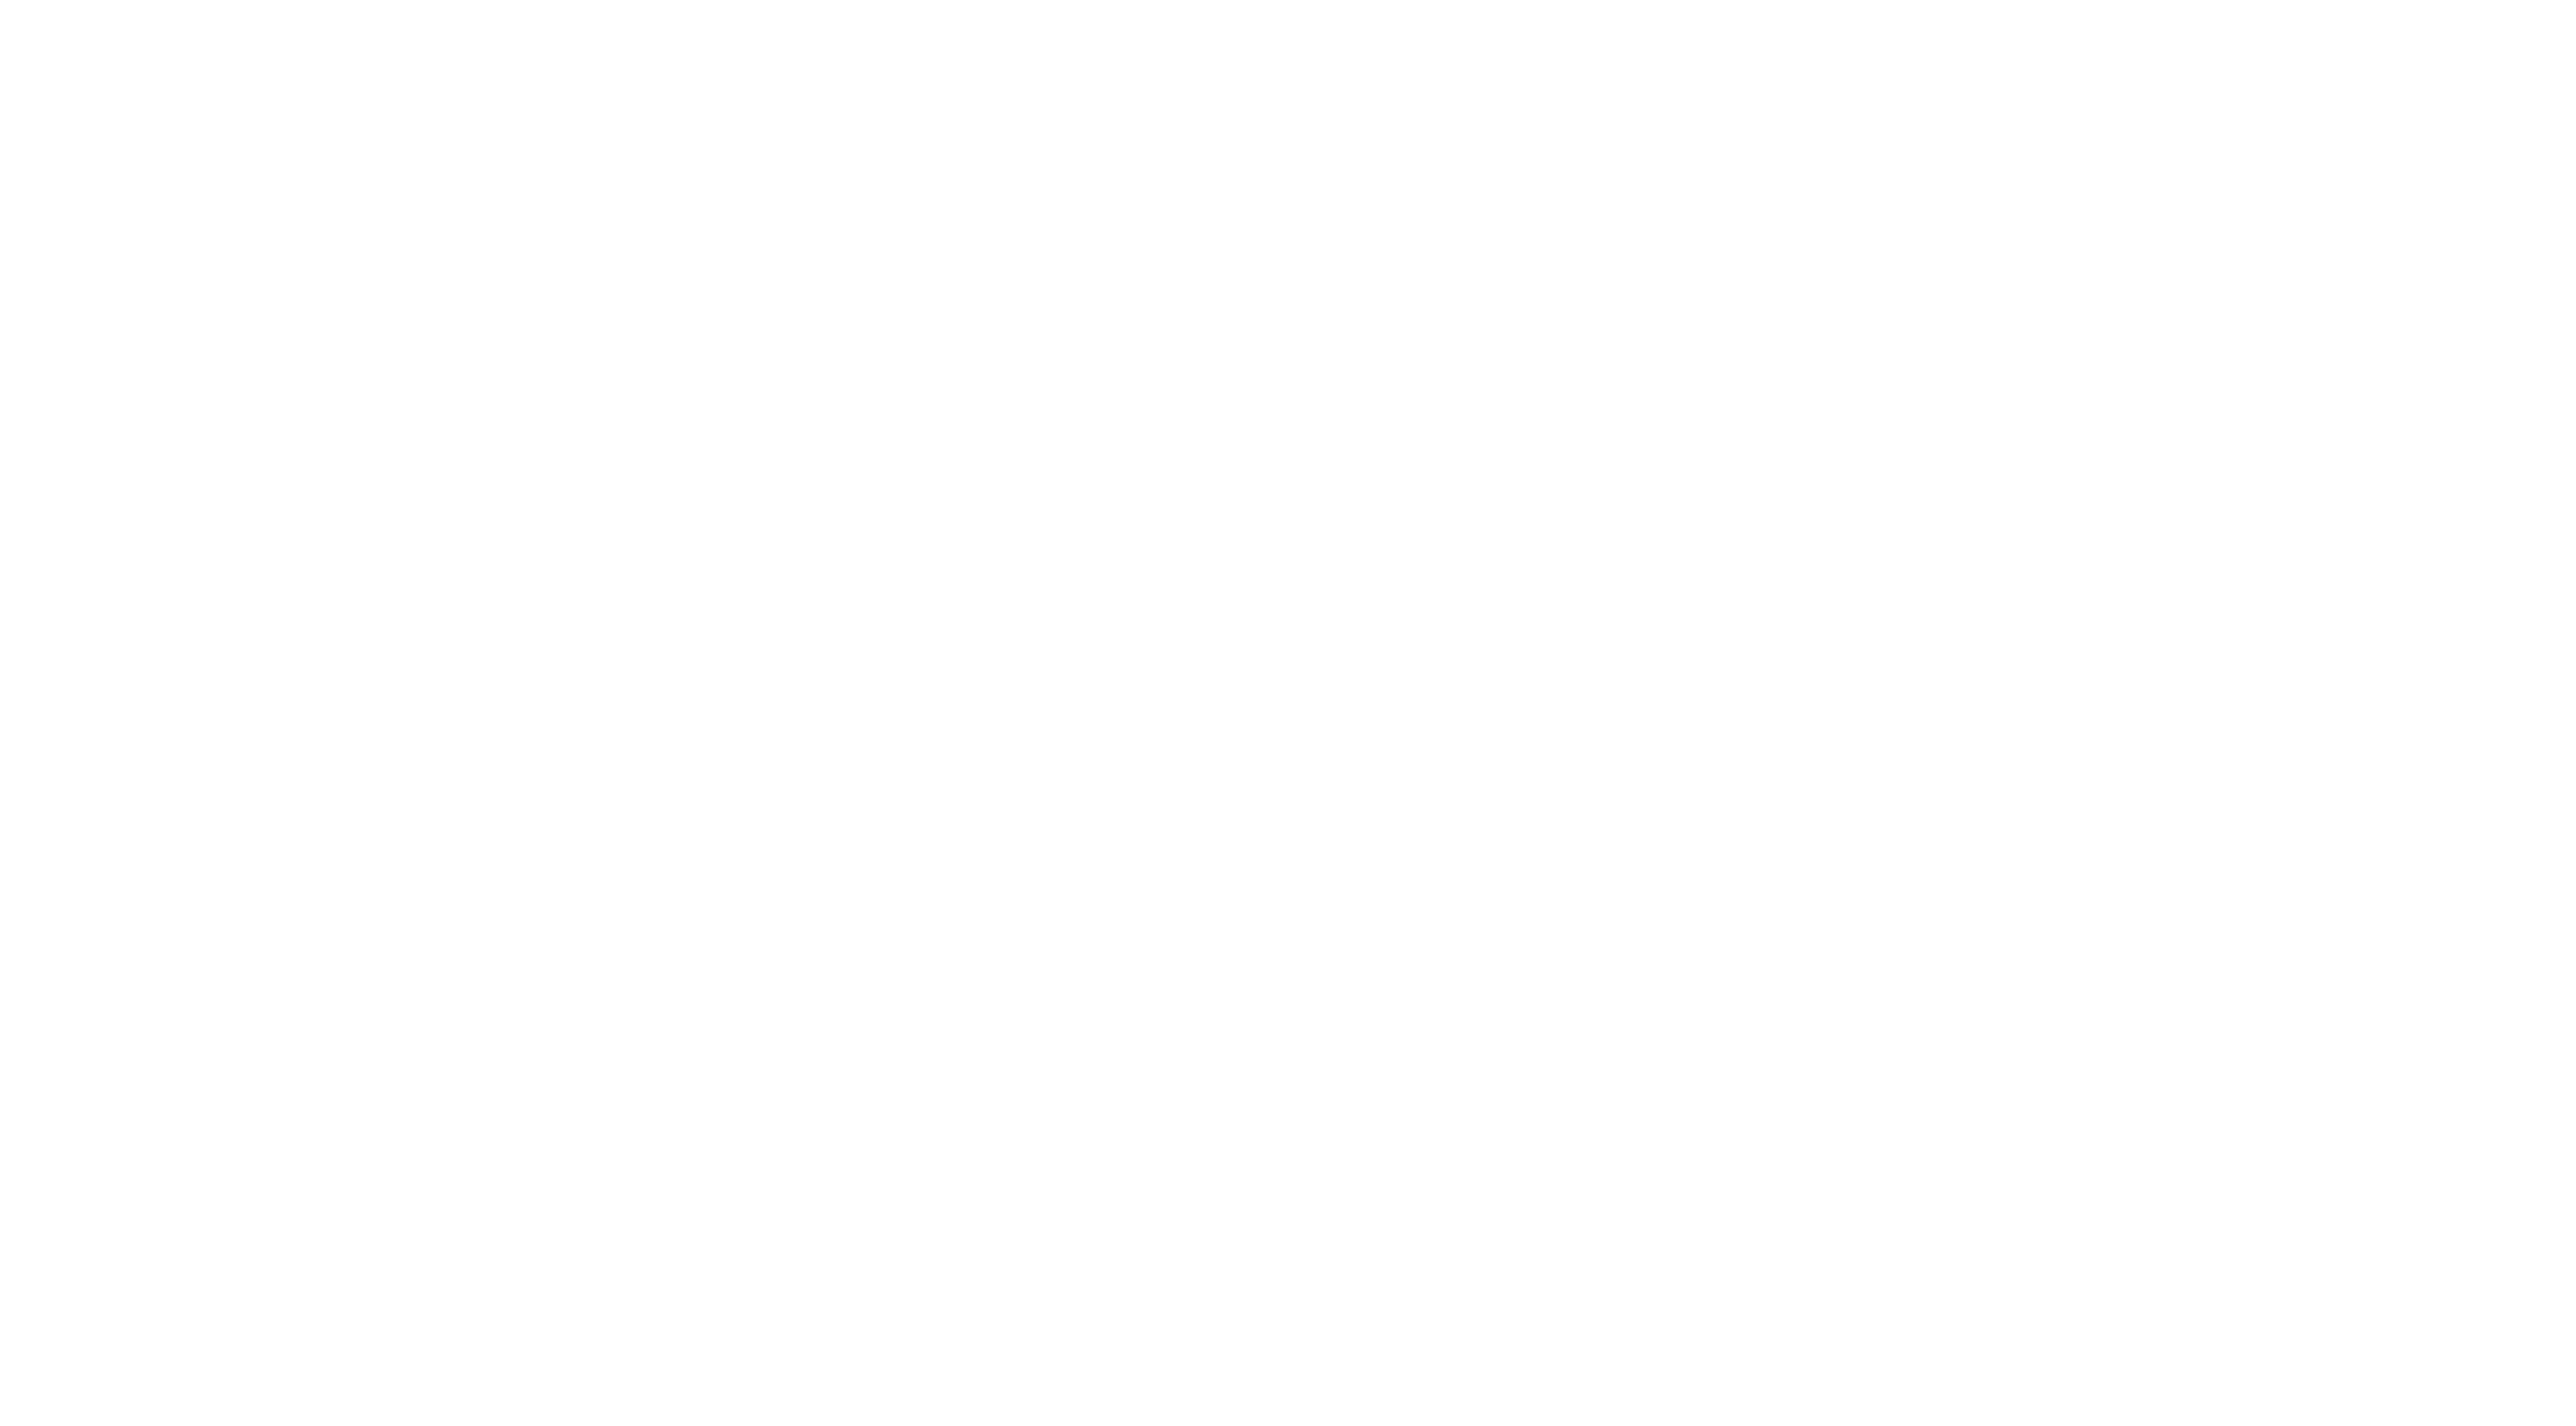 New Mexico Grown logo. "Food from the land, nourishment for the people".